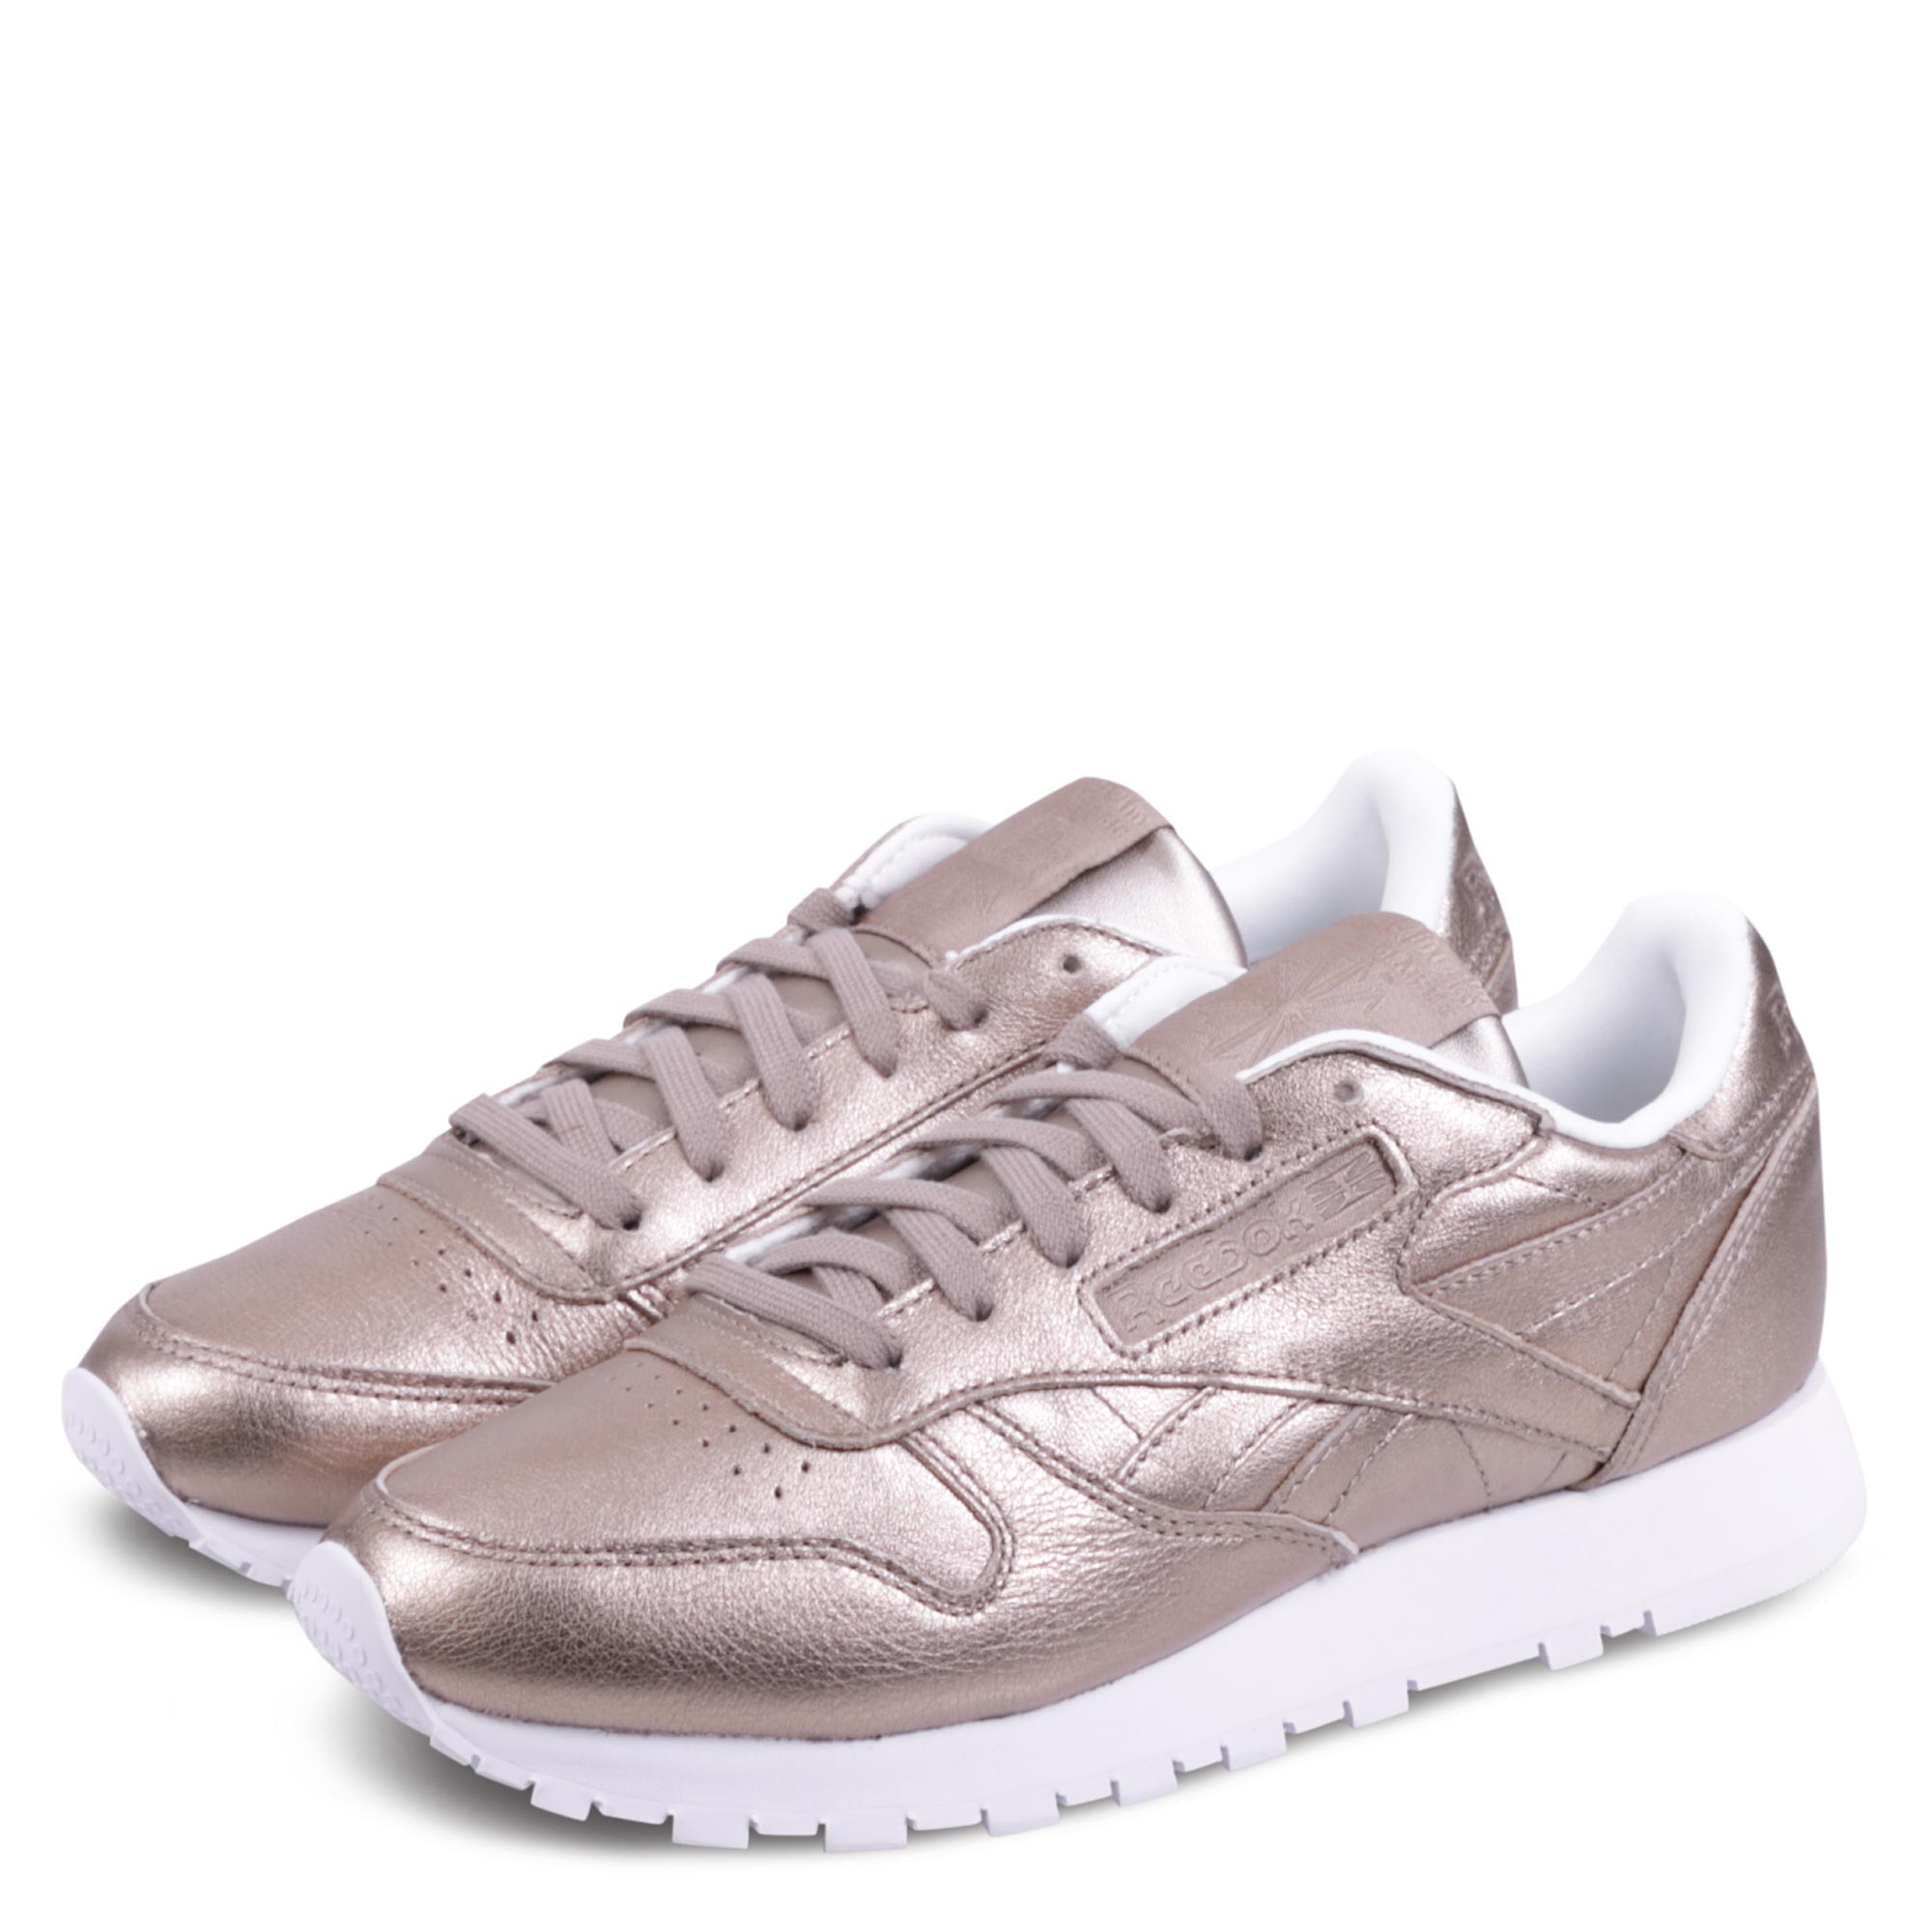 Reebok Classic Leather Melted Metal BS7898